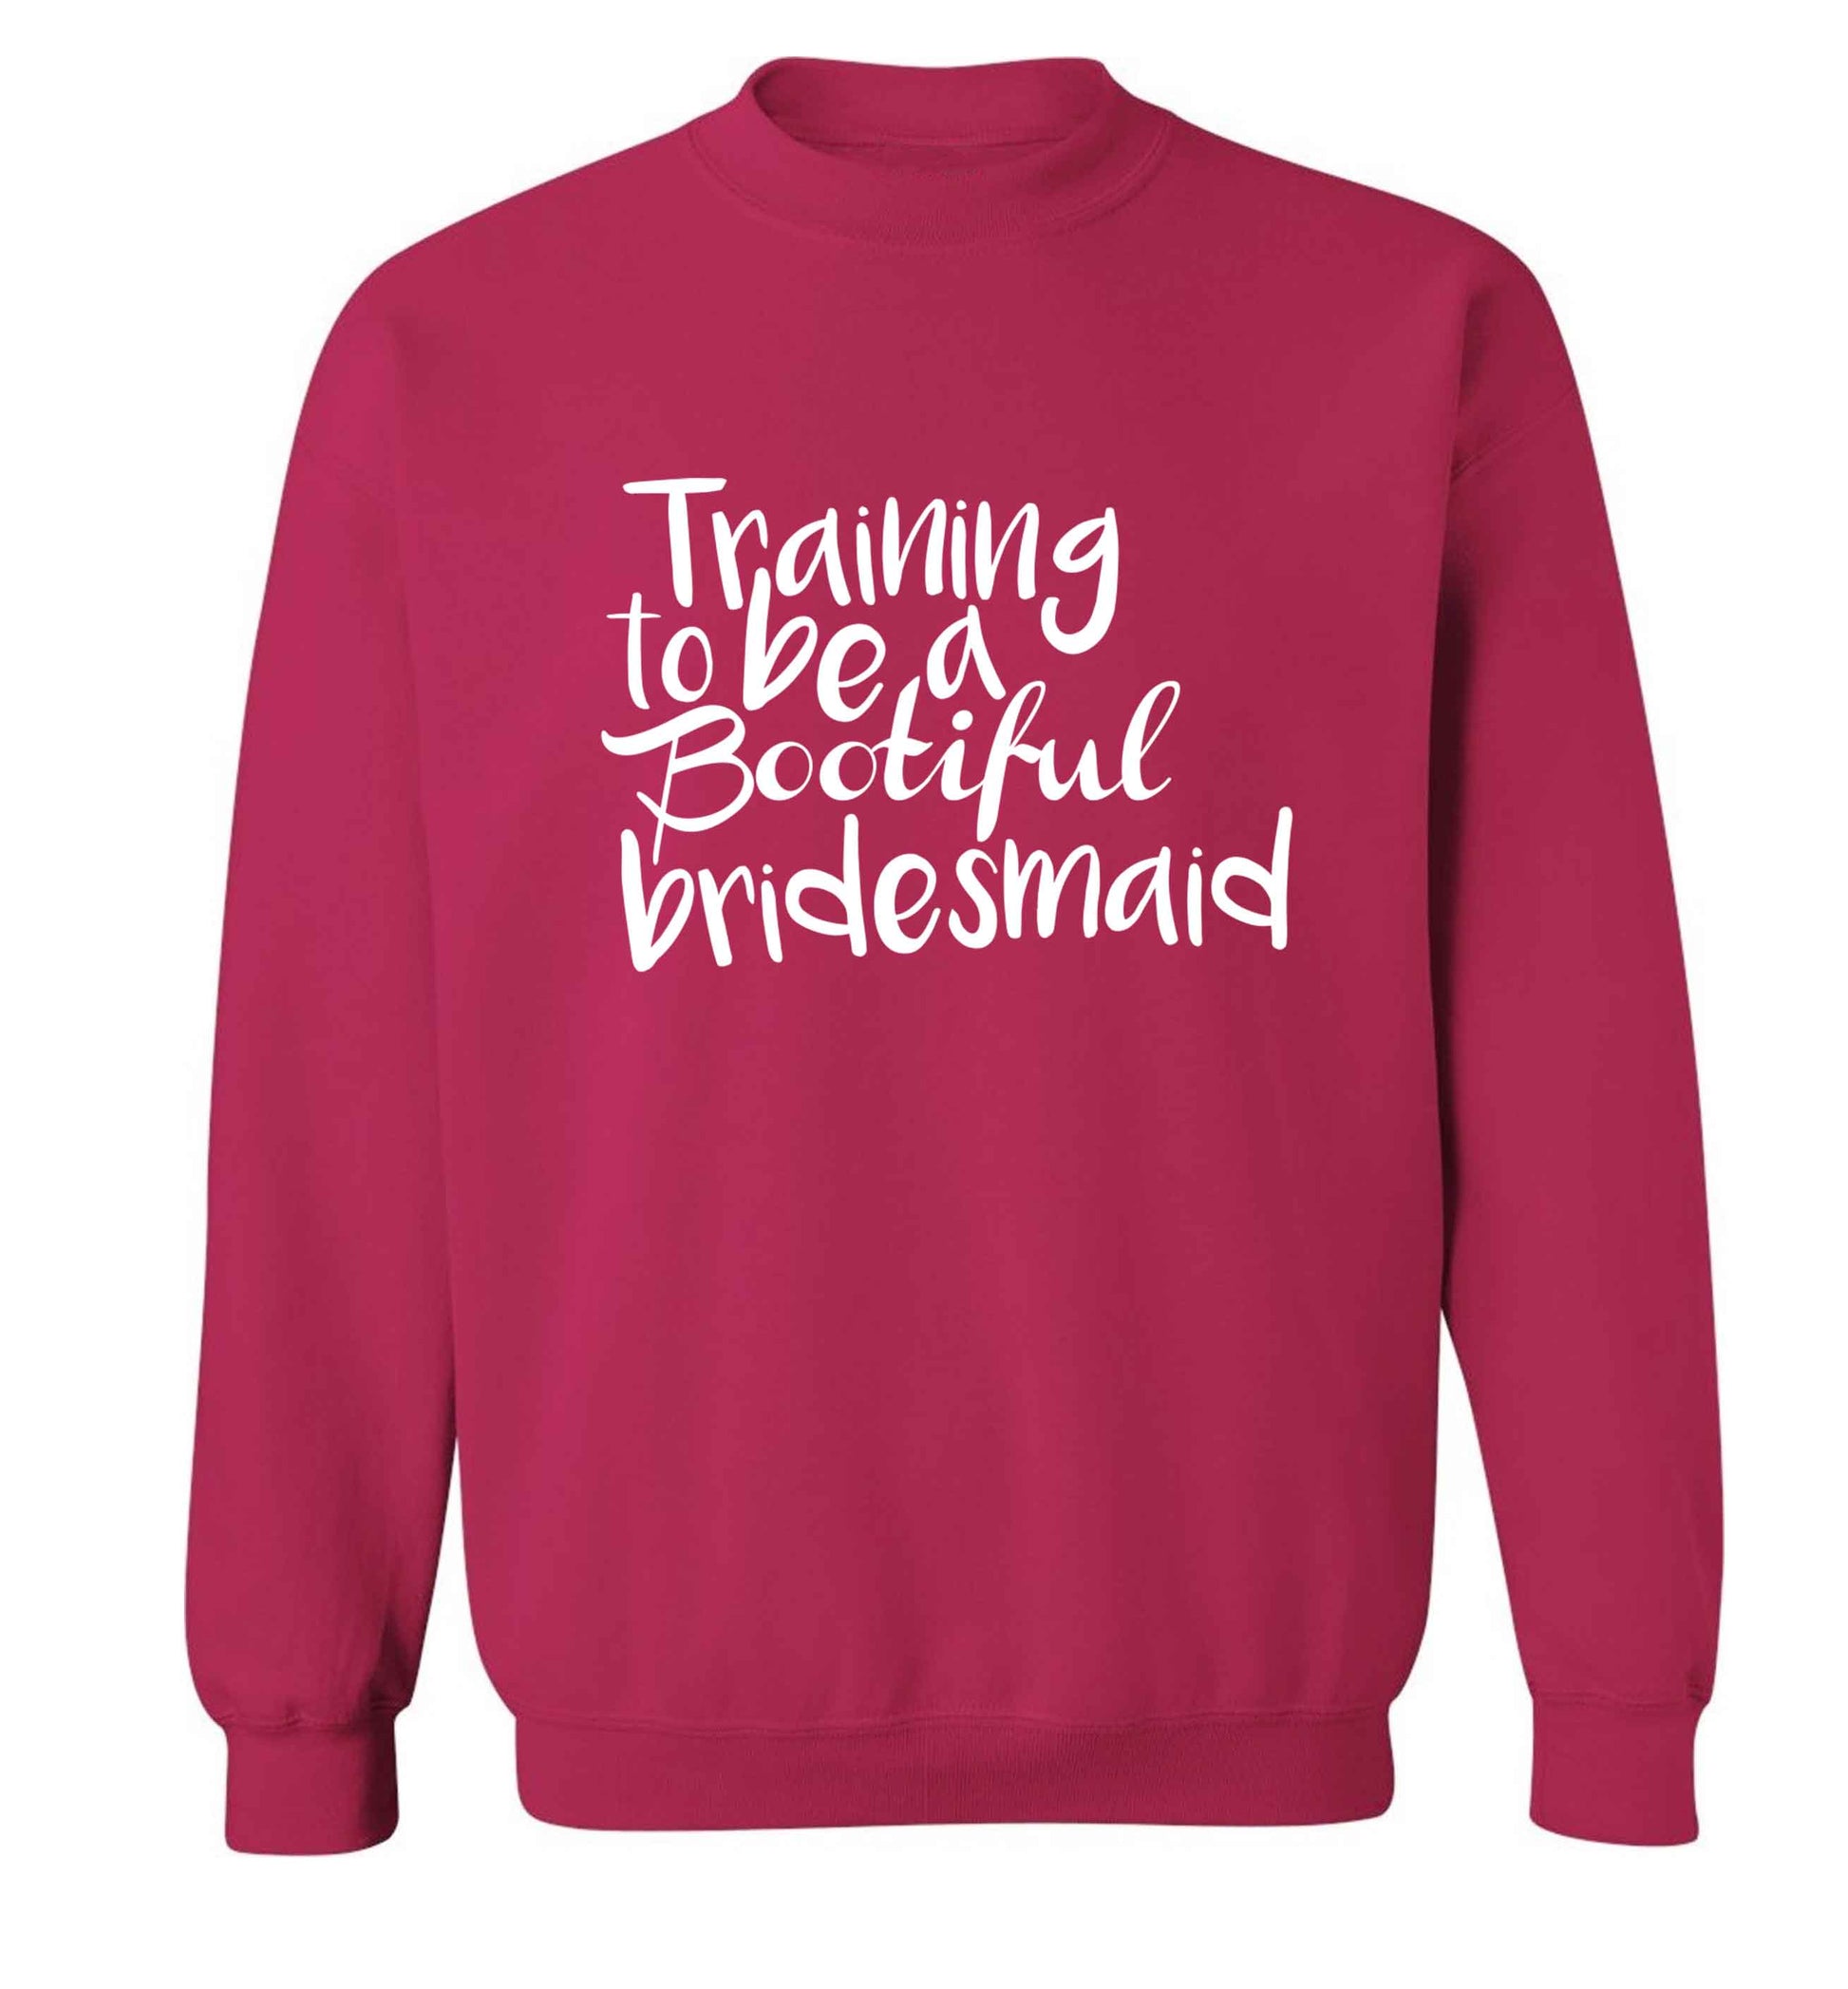 Get motivated and get fit for your big day! Our workout quotes and designs will get you ready to sweat! Perfect for any bride, groom or bridesmaid to be!  adult's unisex pink sweater 2XL